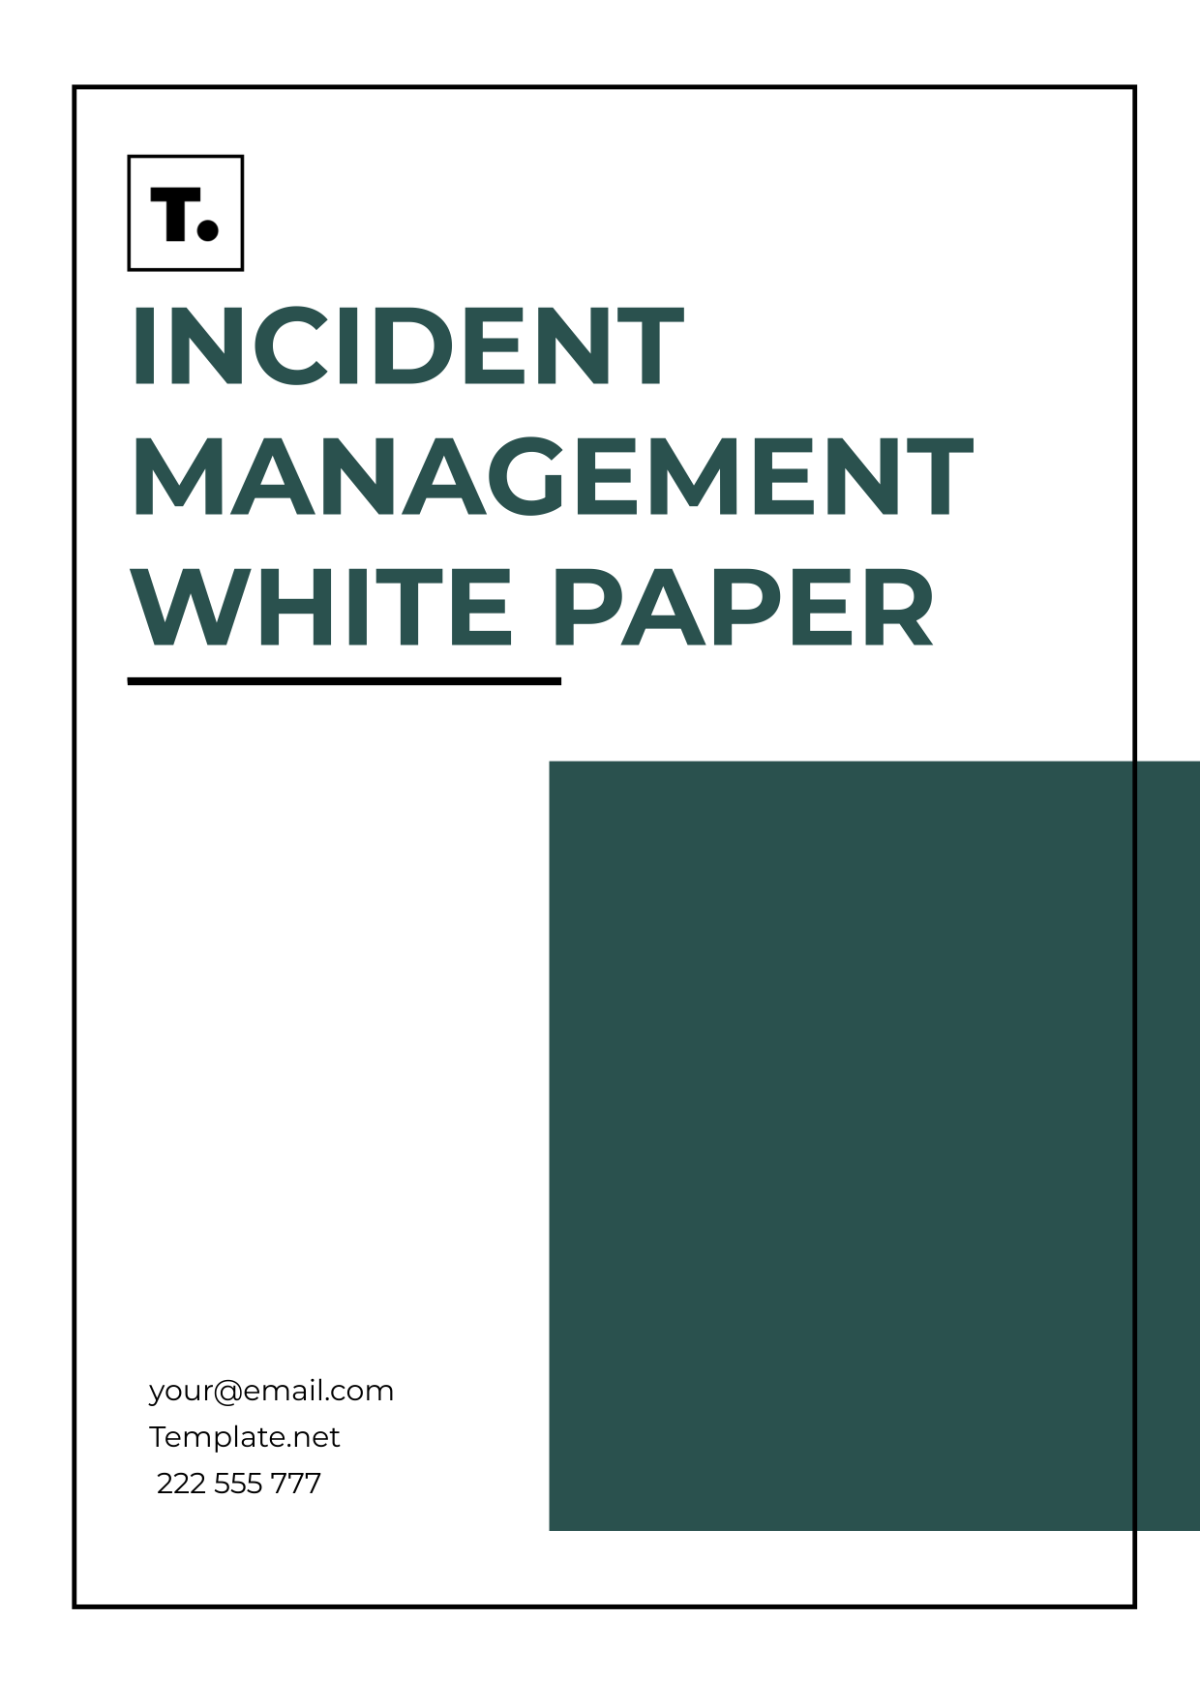 Free Incident Management White Paper Template